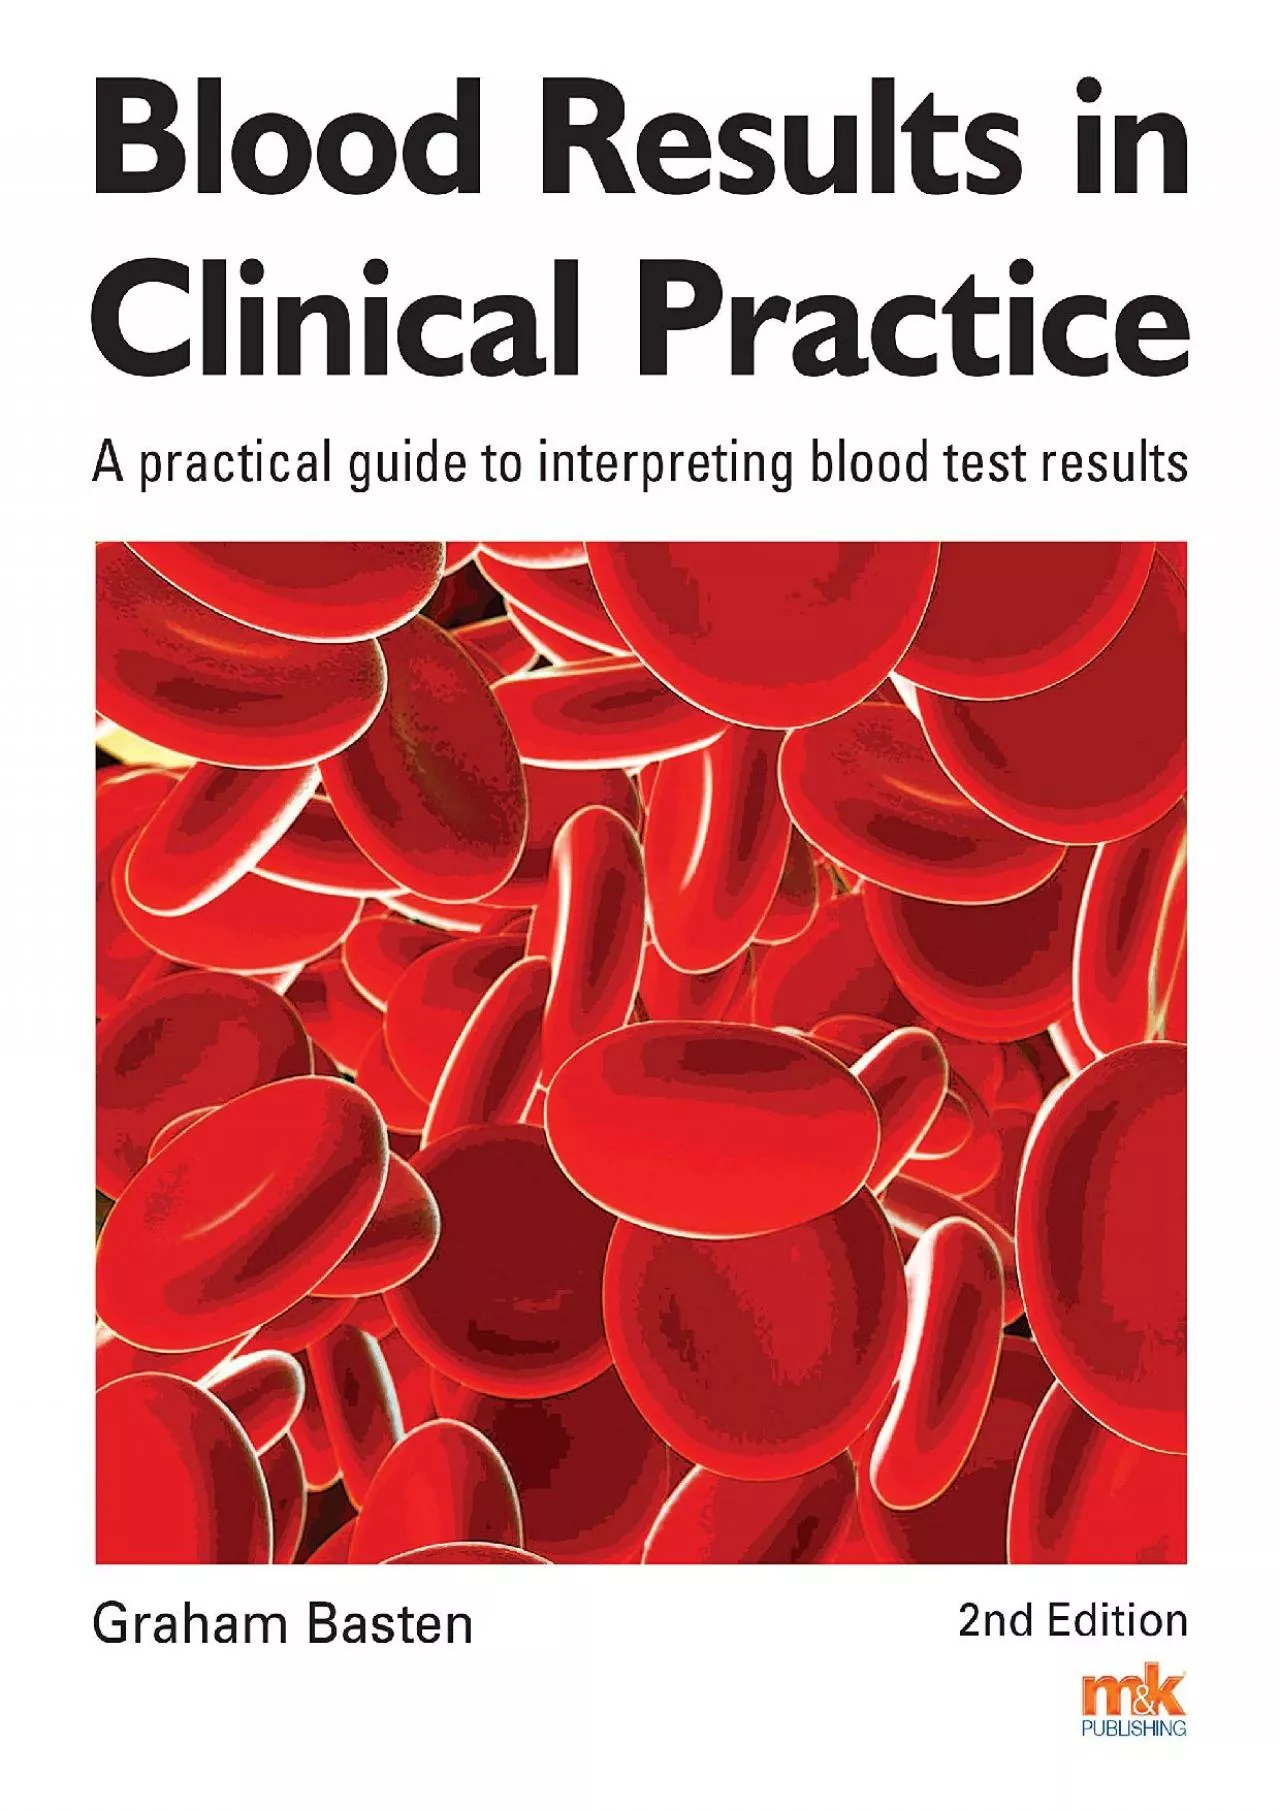 (BOOS)-Blood Results in Clinical Practice: A practical guide to interpreting blood test